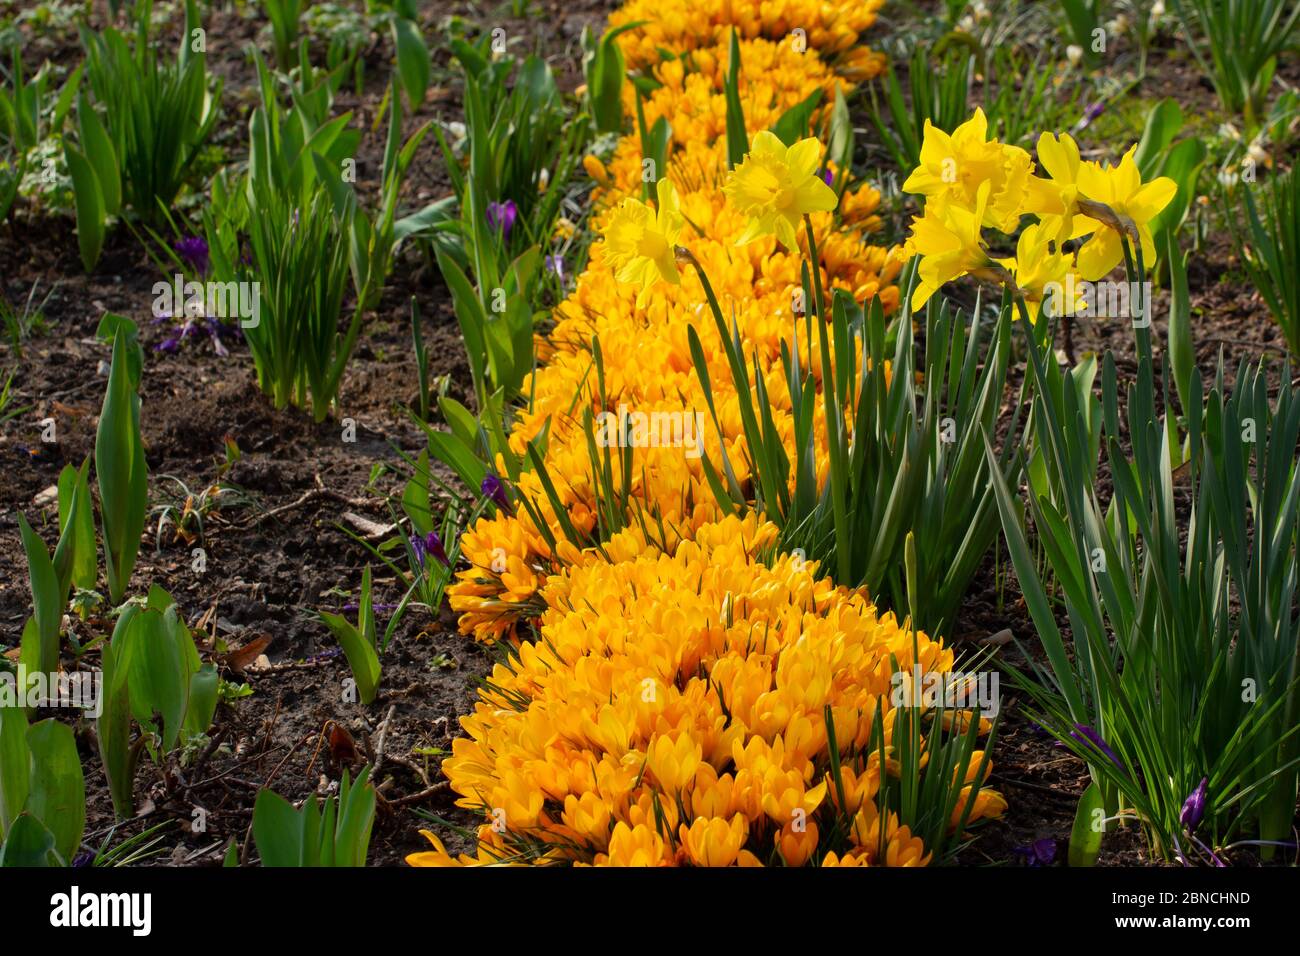 TÌNH YÊU CÂY CỎ ĐV.3 - Page 86 Group-of-yellow-crocus-and-daffodils-crocus-flavus-and-narcissus-pseudonarcissus-2BNCHND